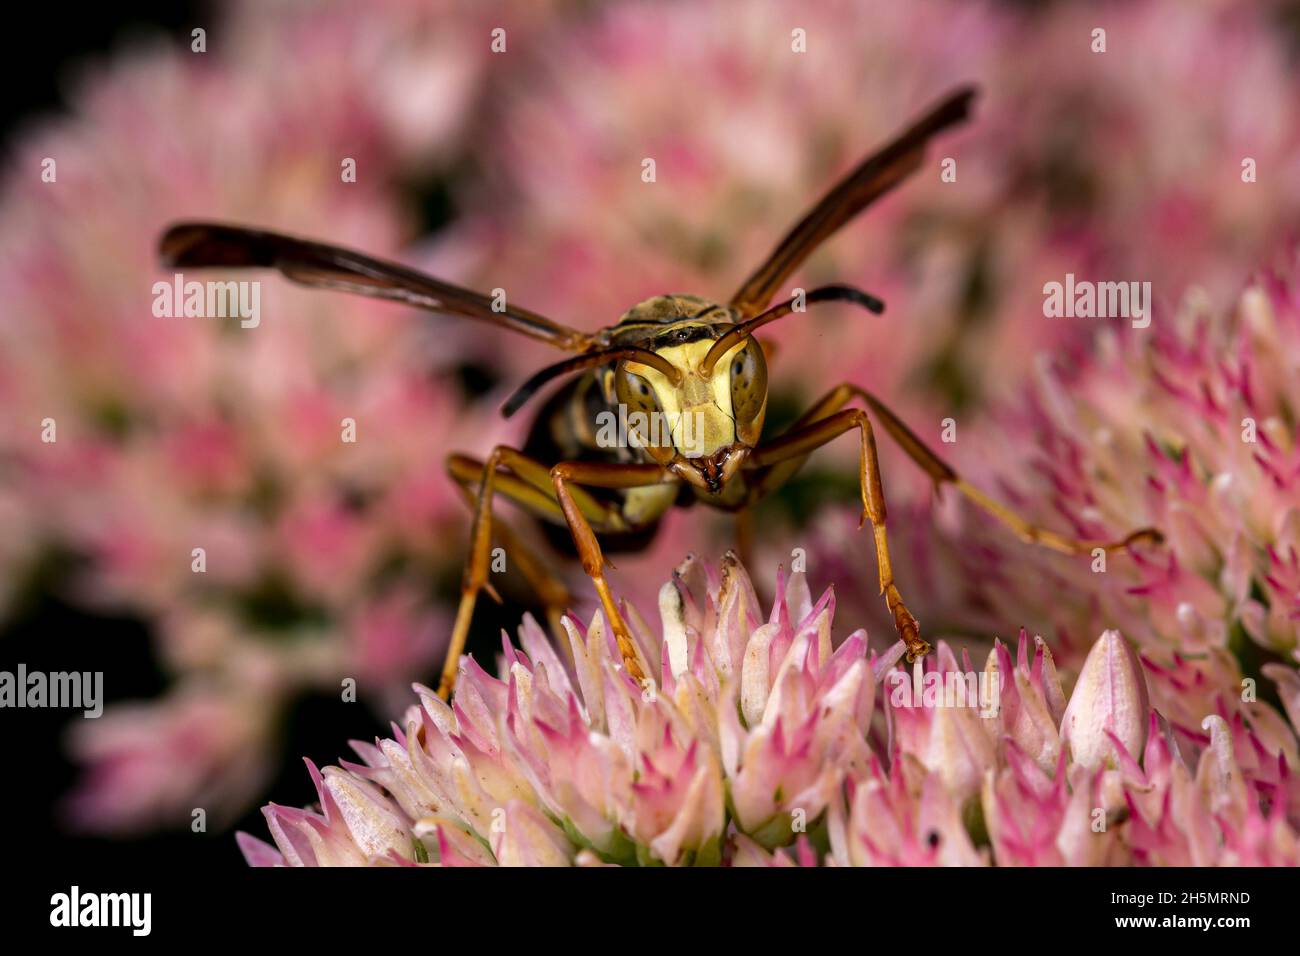 Pale yellow face Northern Paper Wasp feeding on nectar from Sedum plant. Insect and wildlife conservation, habitat preservation, and backyard flower g Stock Photo